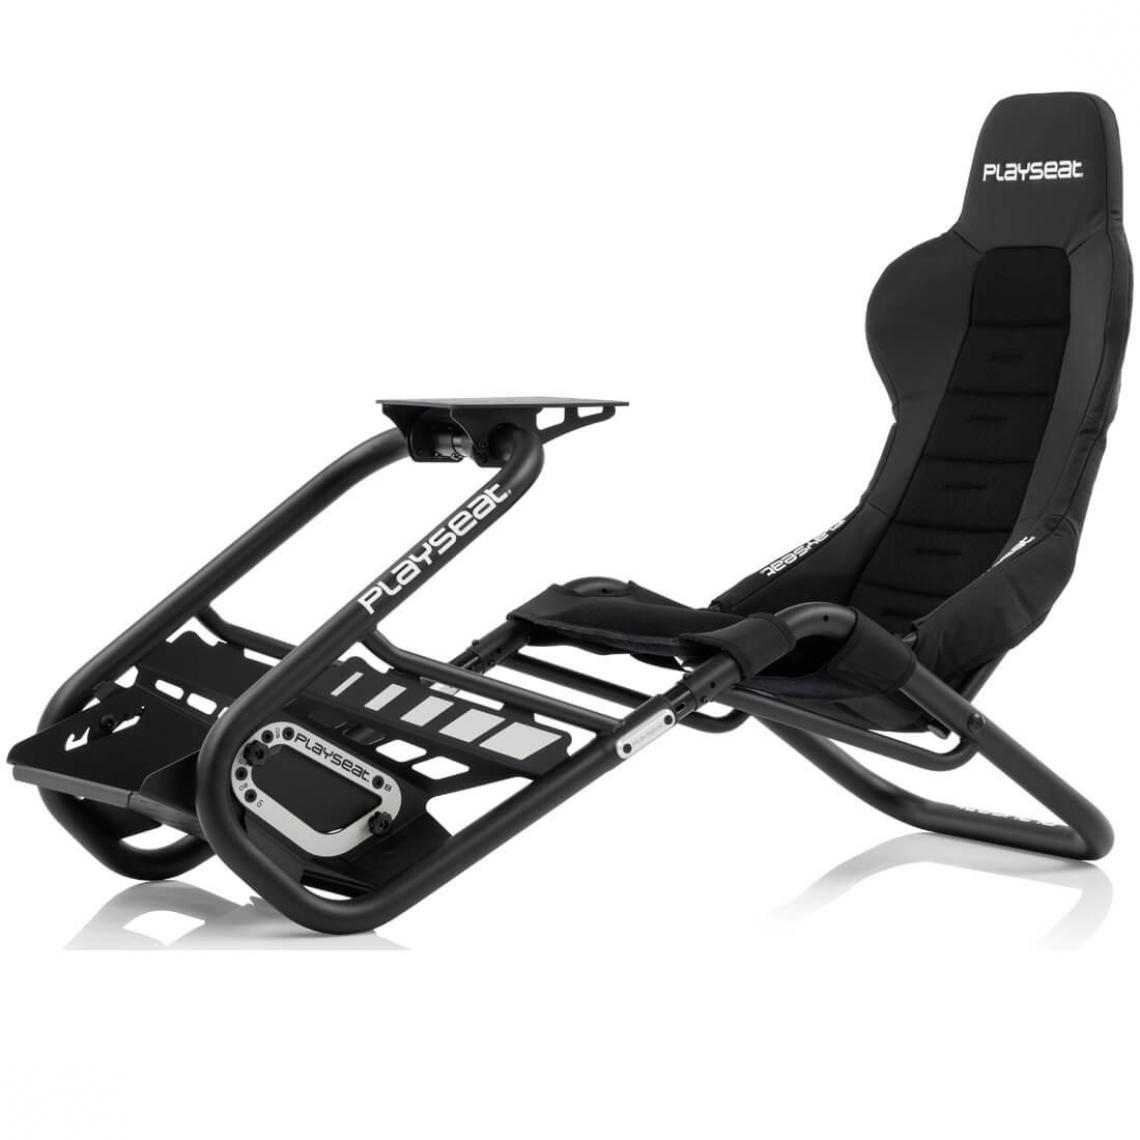 Playseat - Playseat® Trophy - Black - Chaise gamer